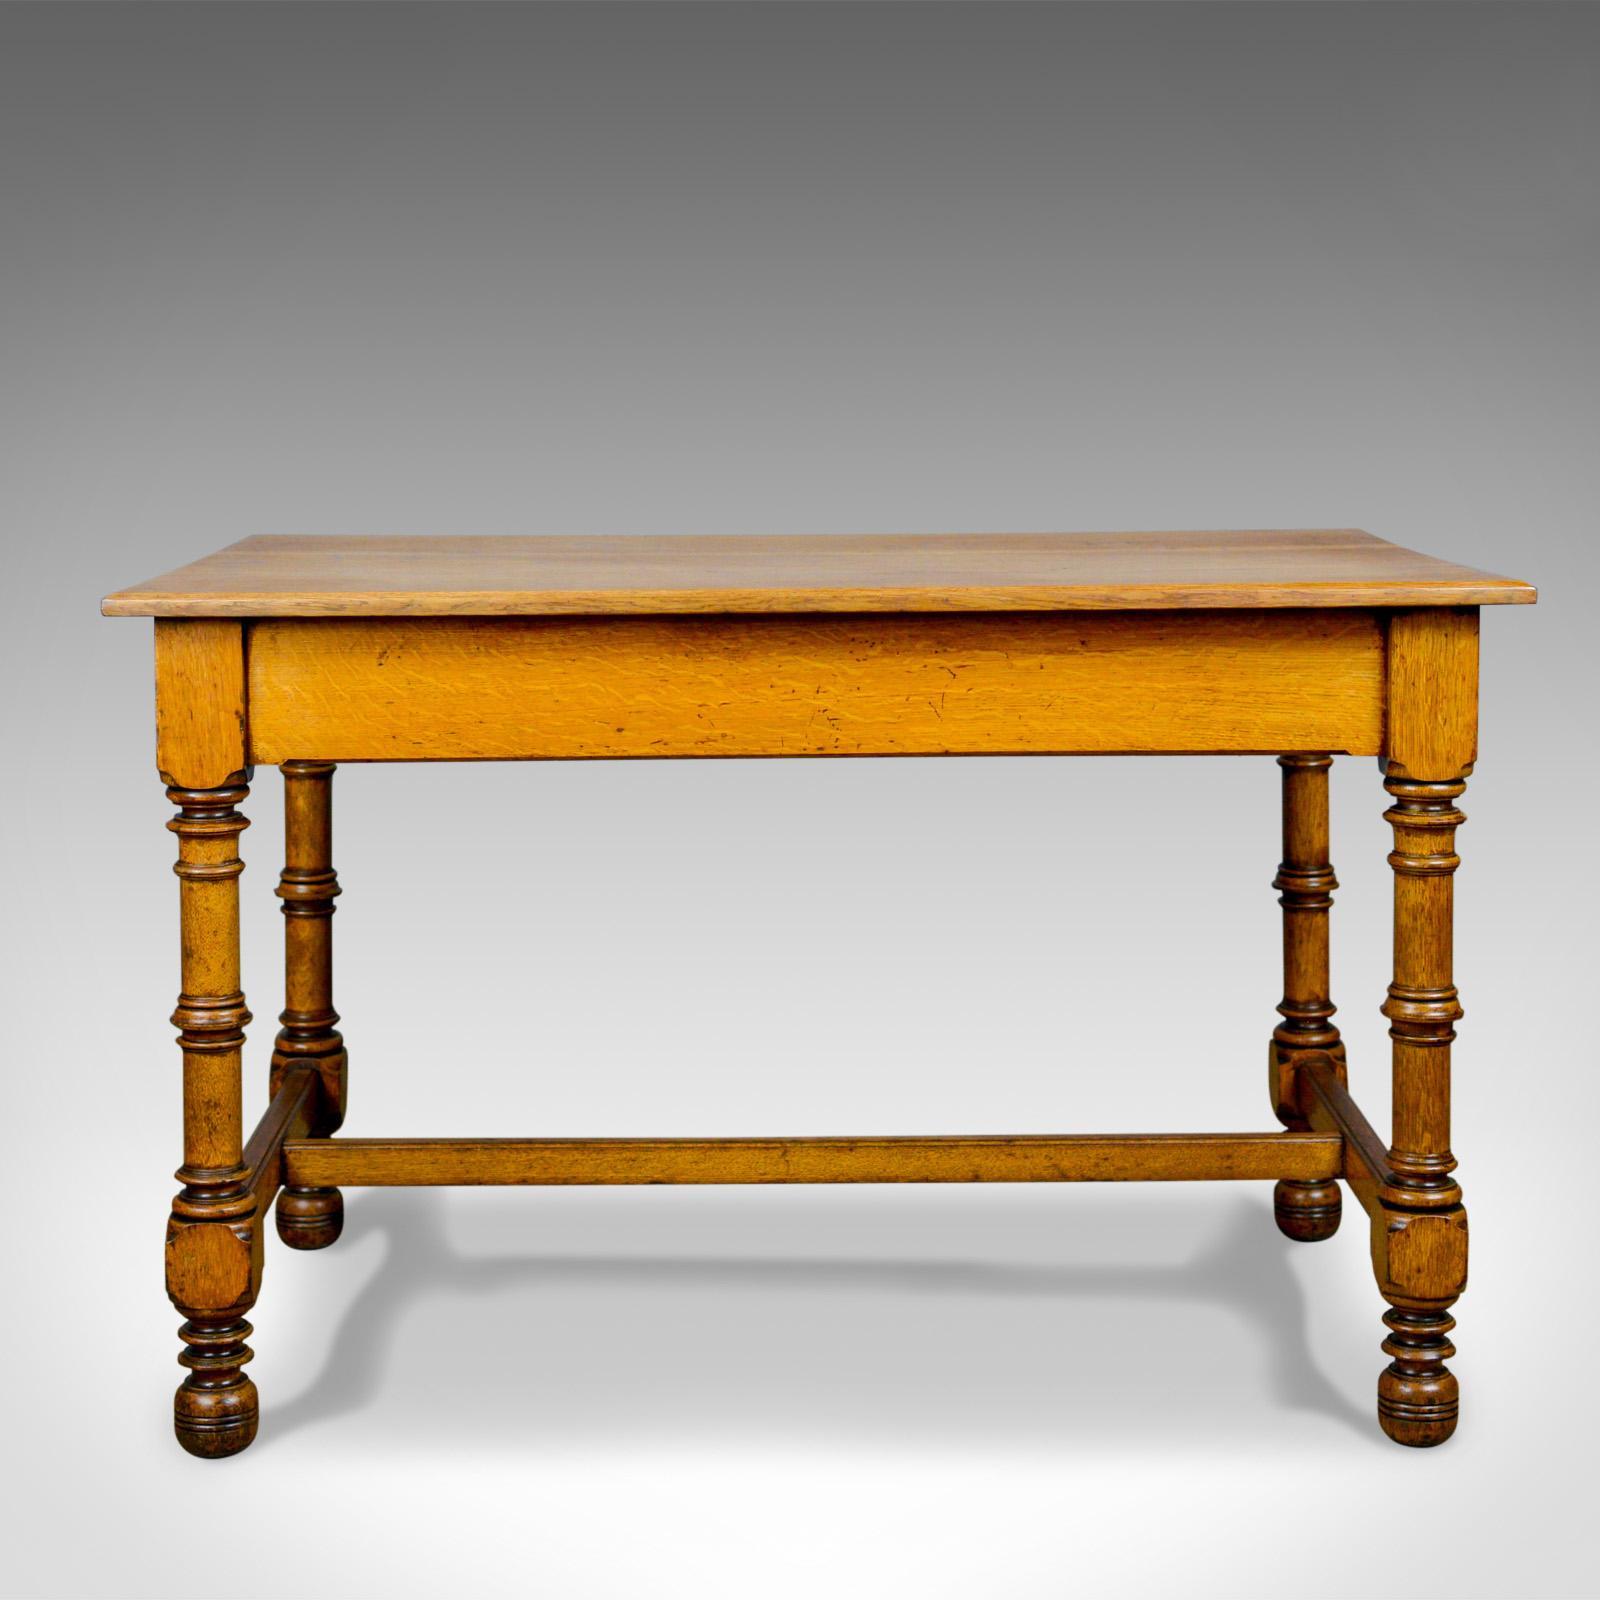 This is a Classic antique writing table, an English, Victorian side table in oak from the late 19th century, circa 1870.

Solid and stabile in strong English oak with a desirable aged patina
Honey hues with attractive grain detail in a waxed